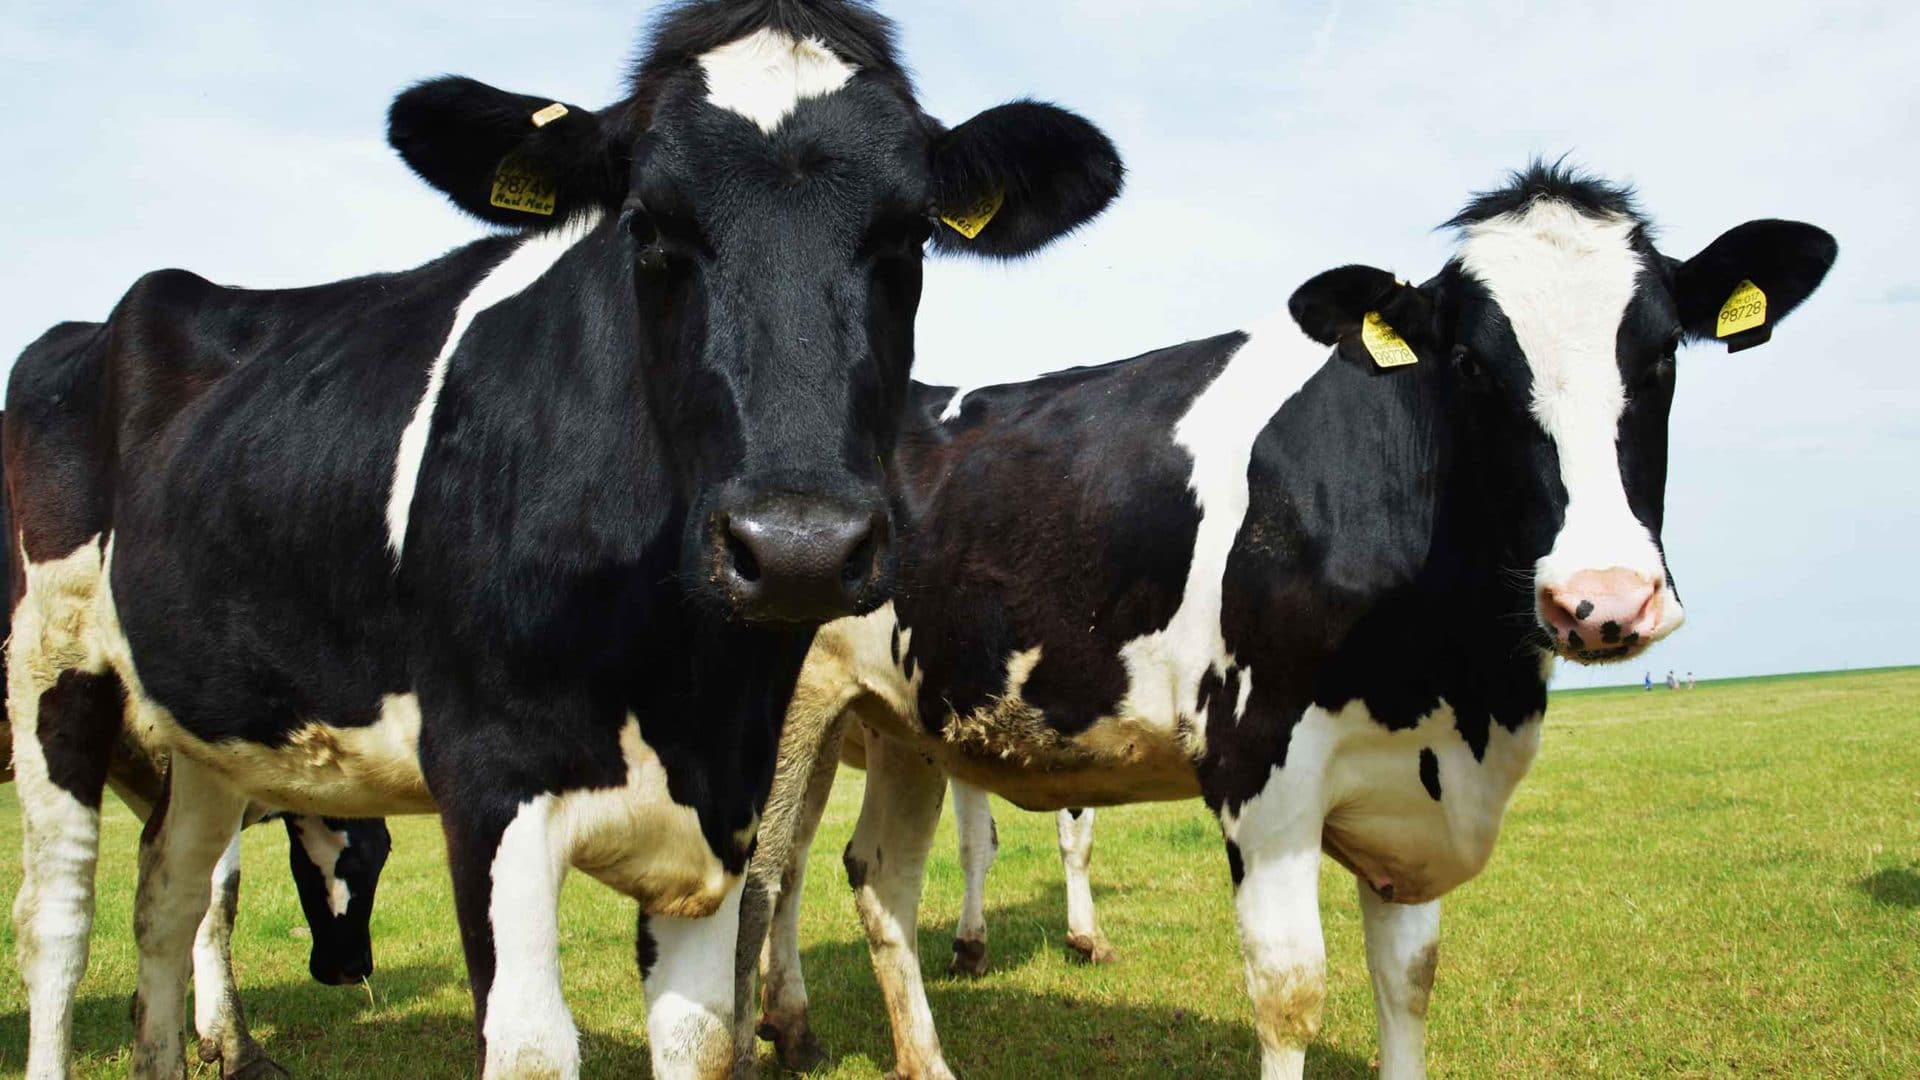 Can Cows Affect Climate Change?